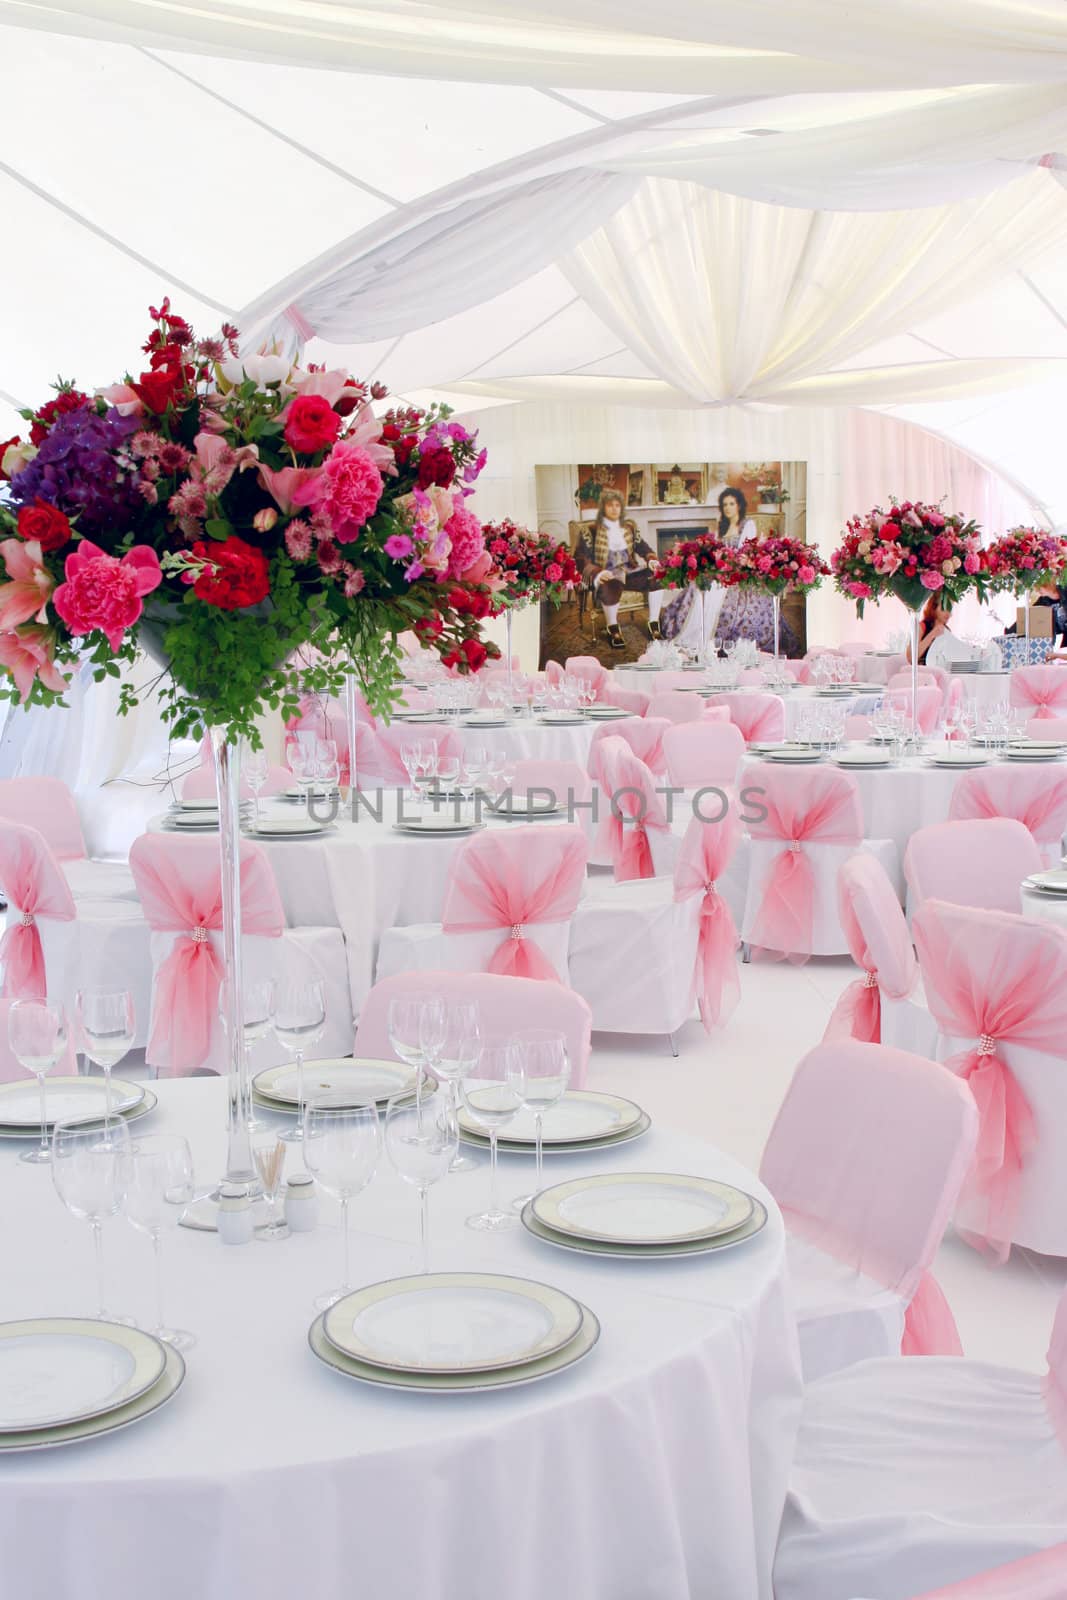 The wedding table decorated by pink colors and flowers